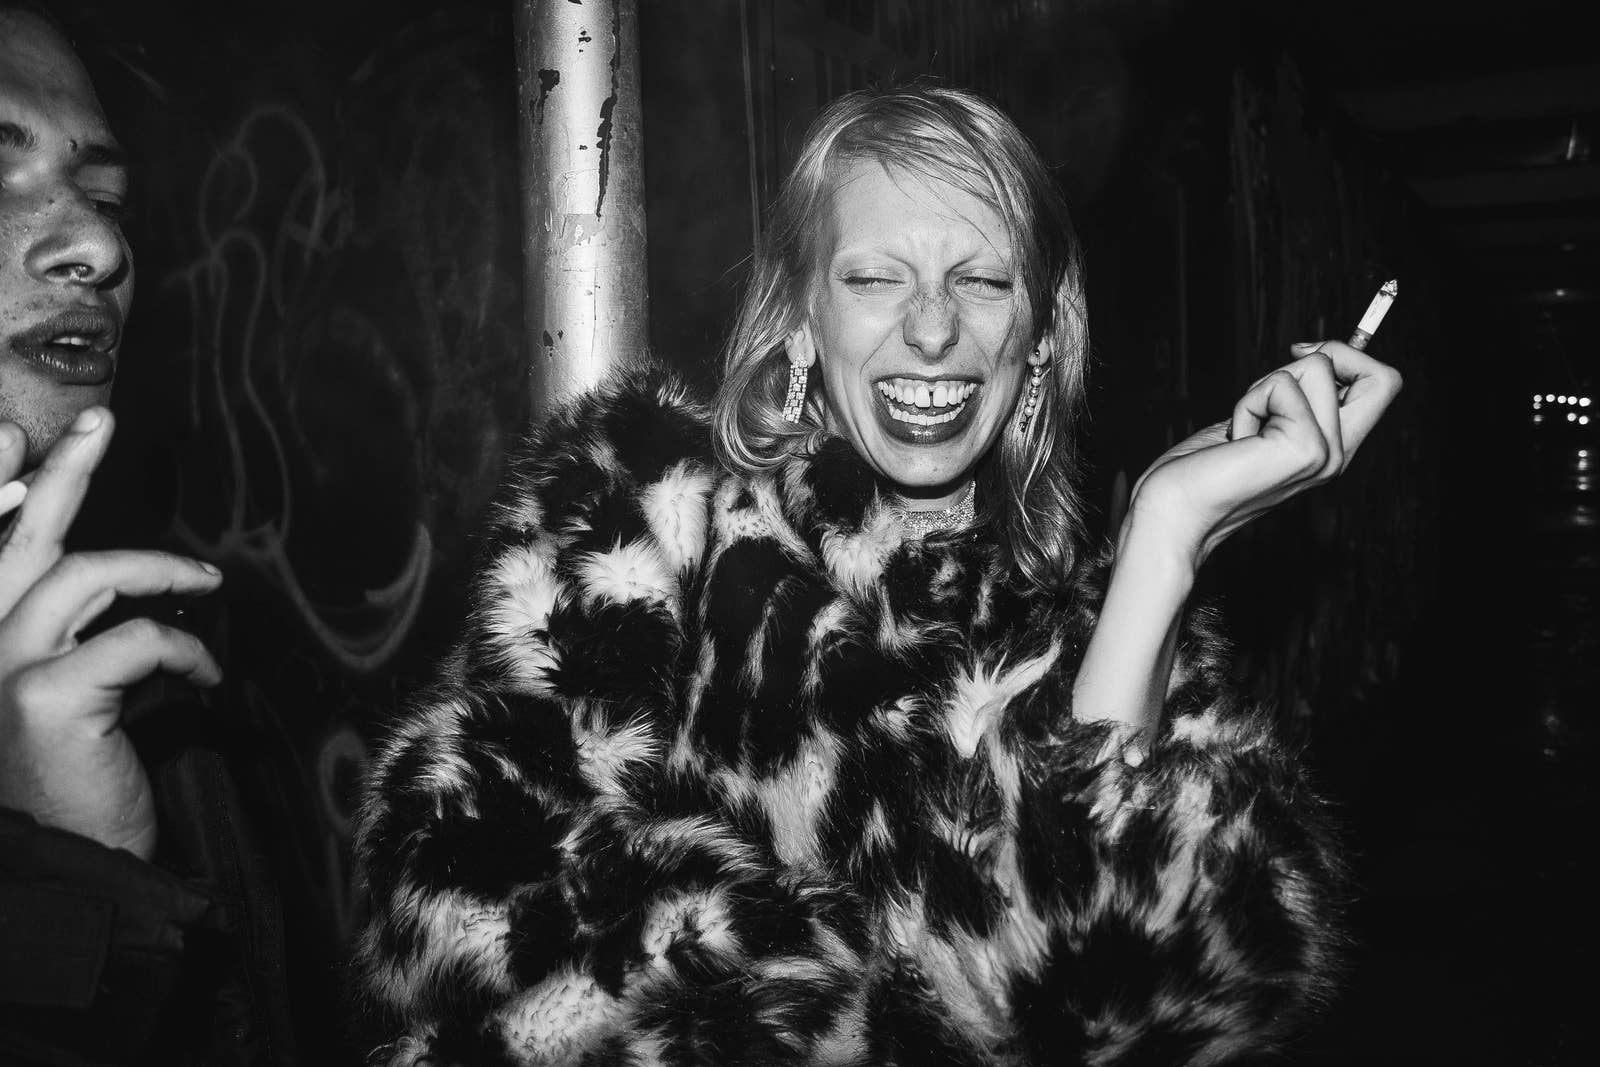 A woman wearing a fur coat laughs while smoking a cigarette